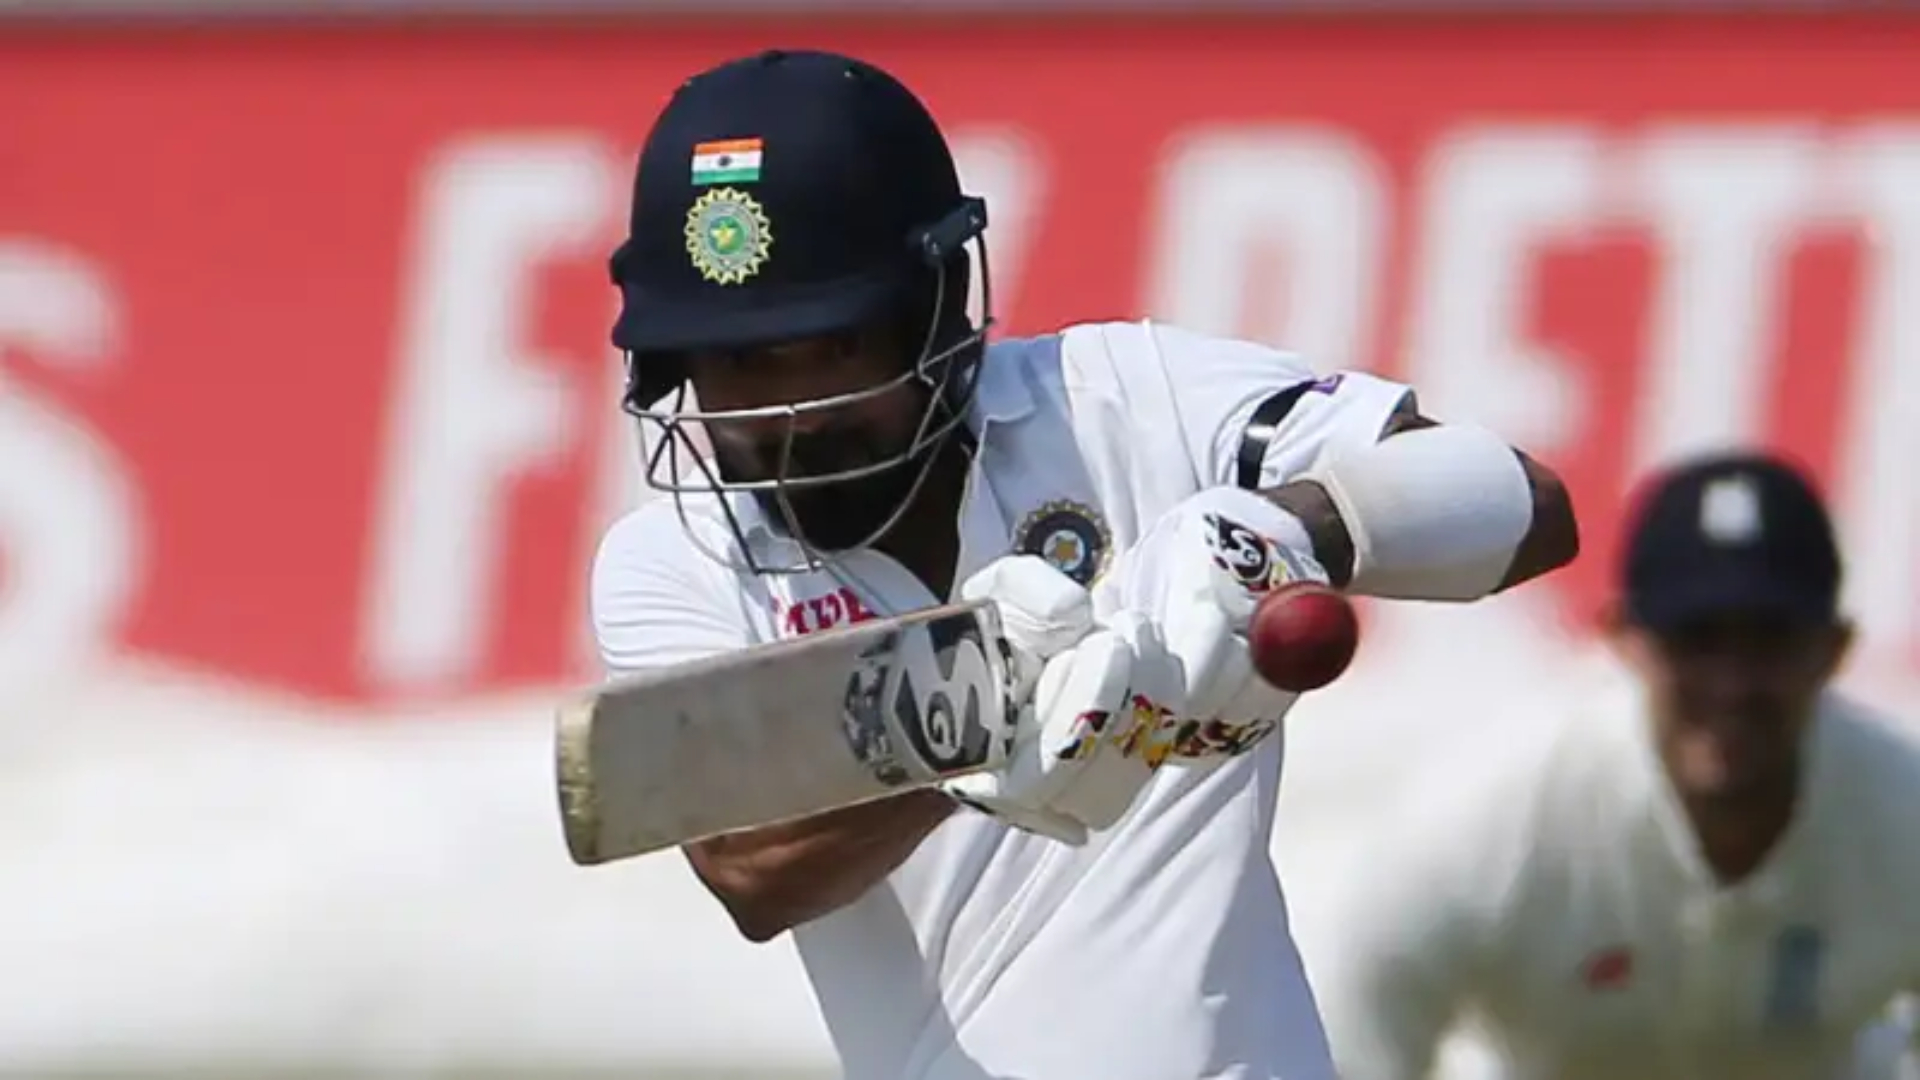 KL Rahul to miss third Test against England due to sore knee: Report